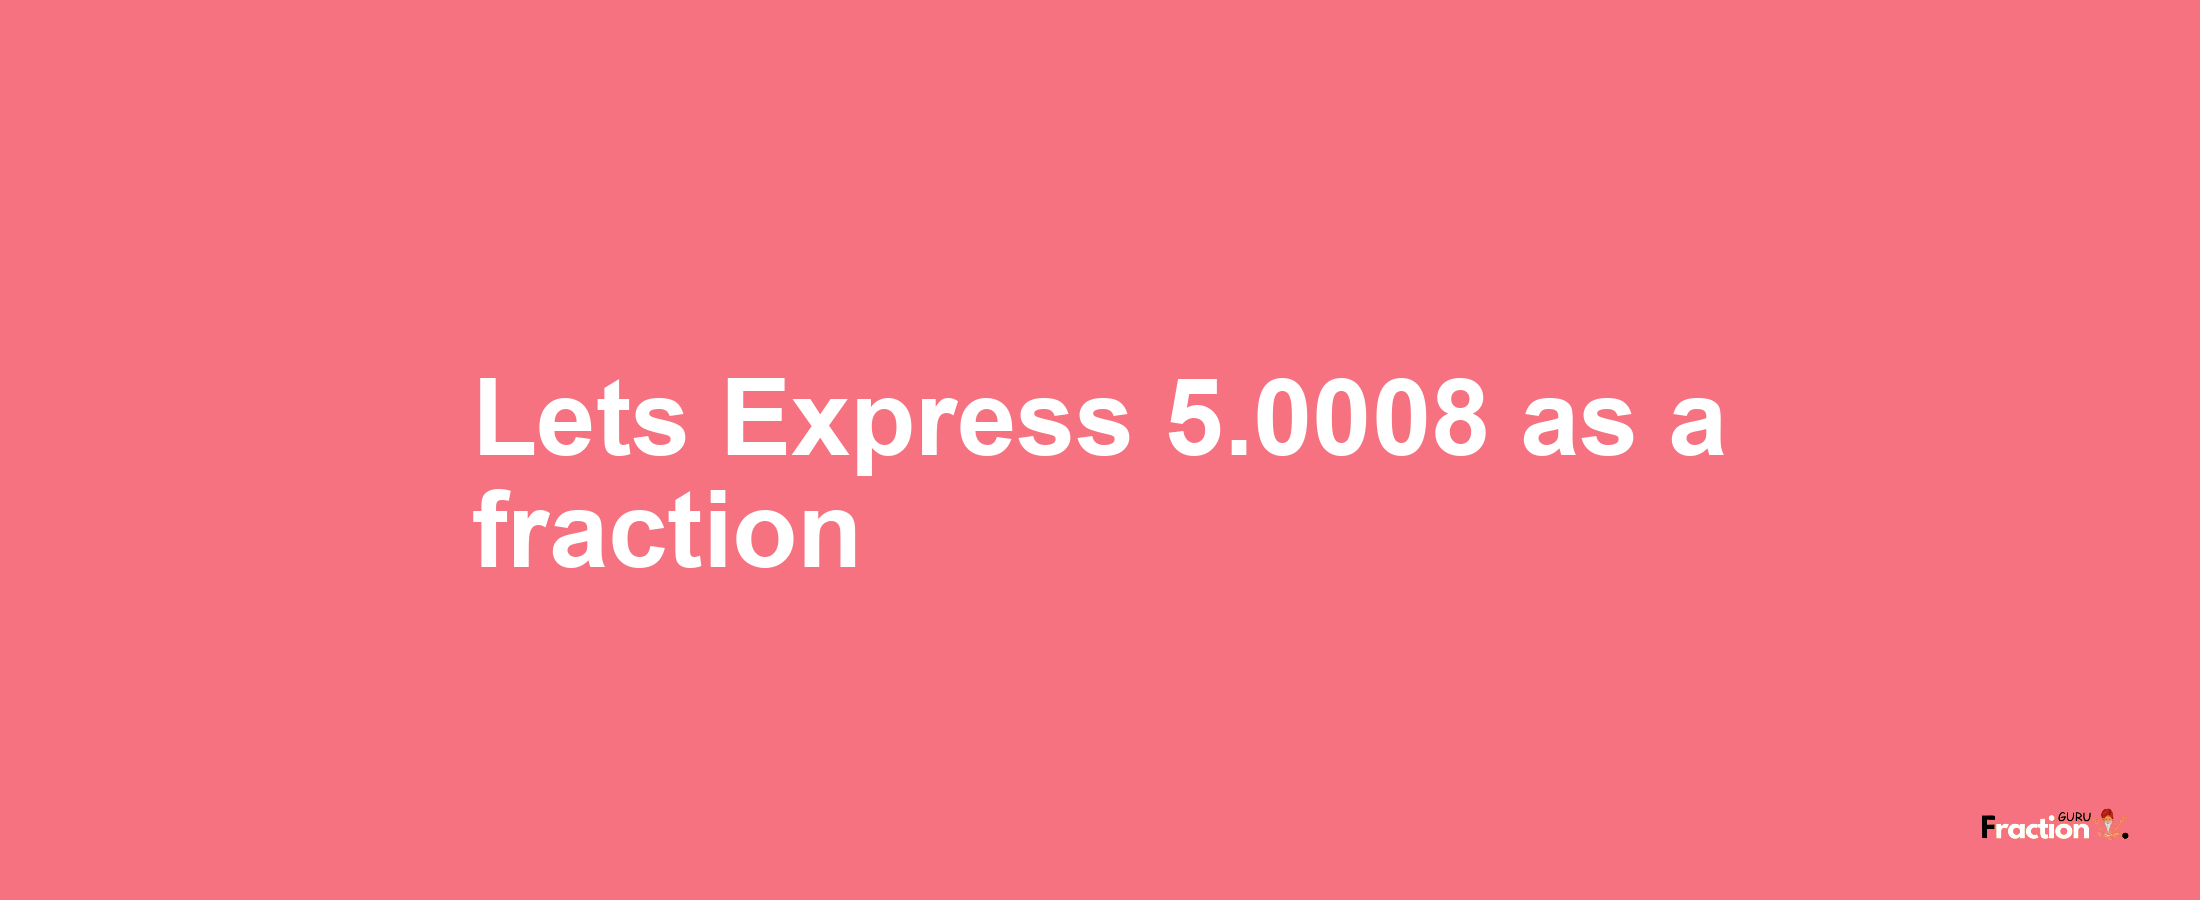 Lets Express 5.0008 as afraction